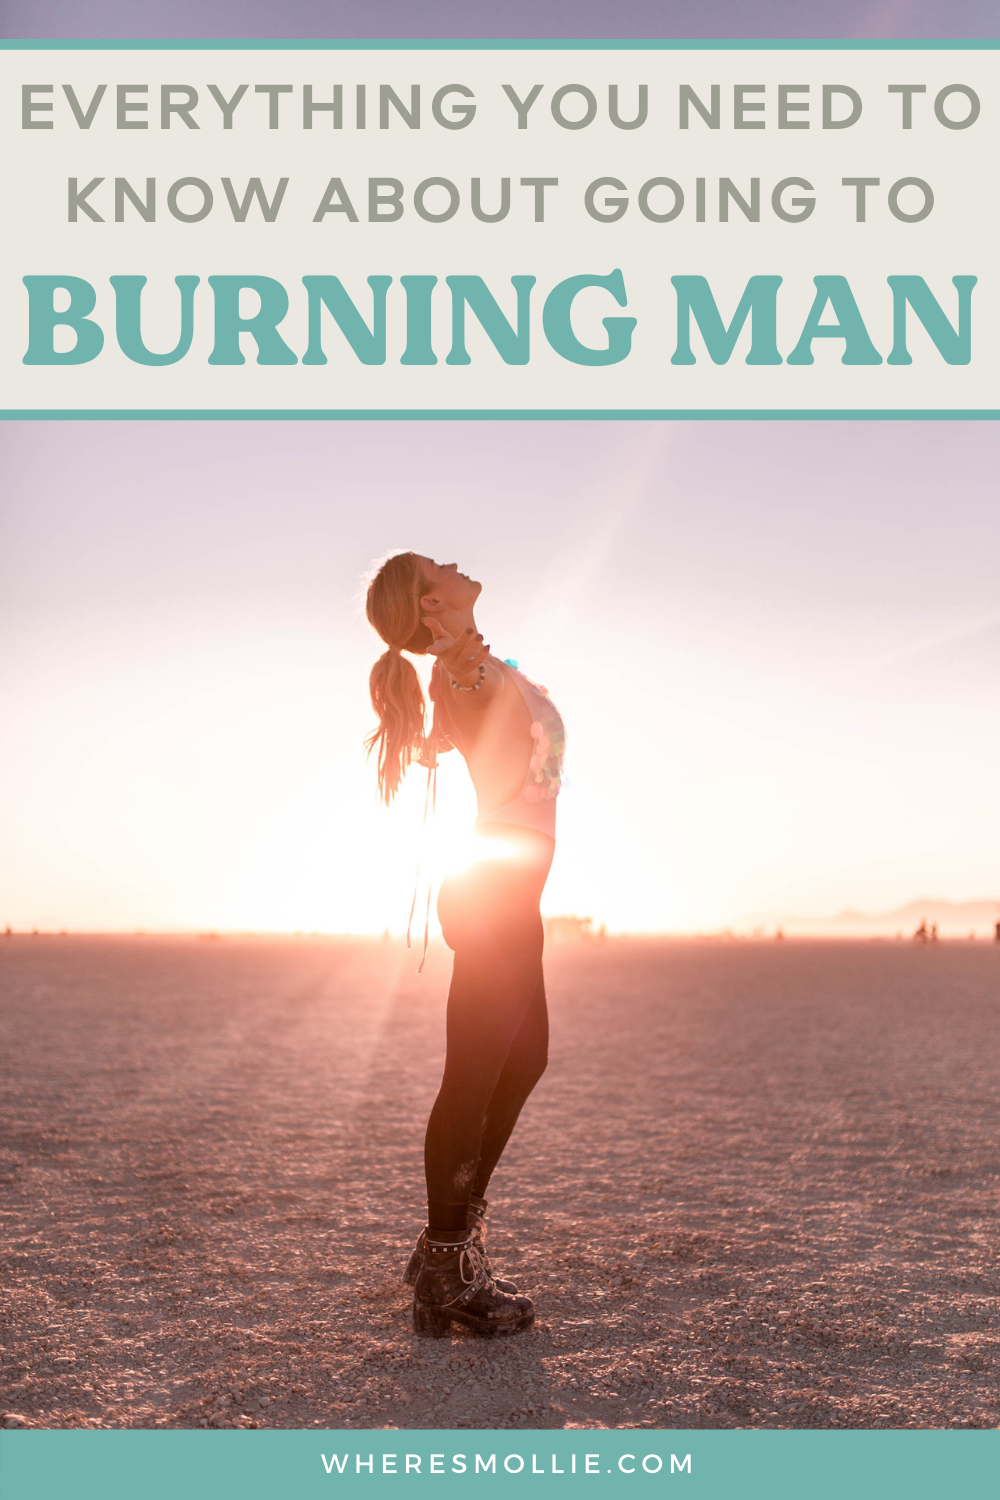 21 top tips if you\'re heading to Burning Man 2021